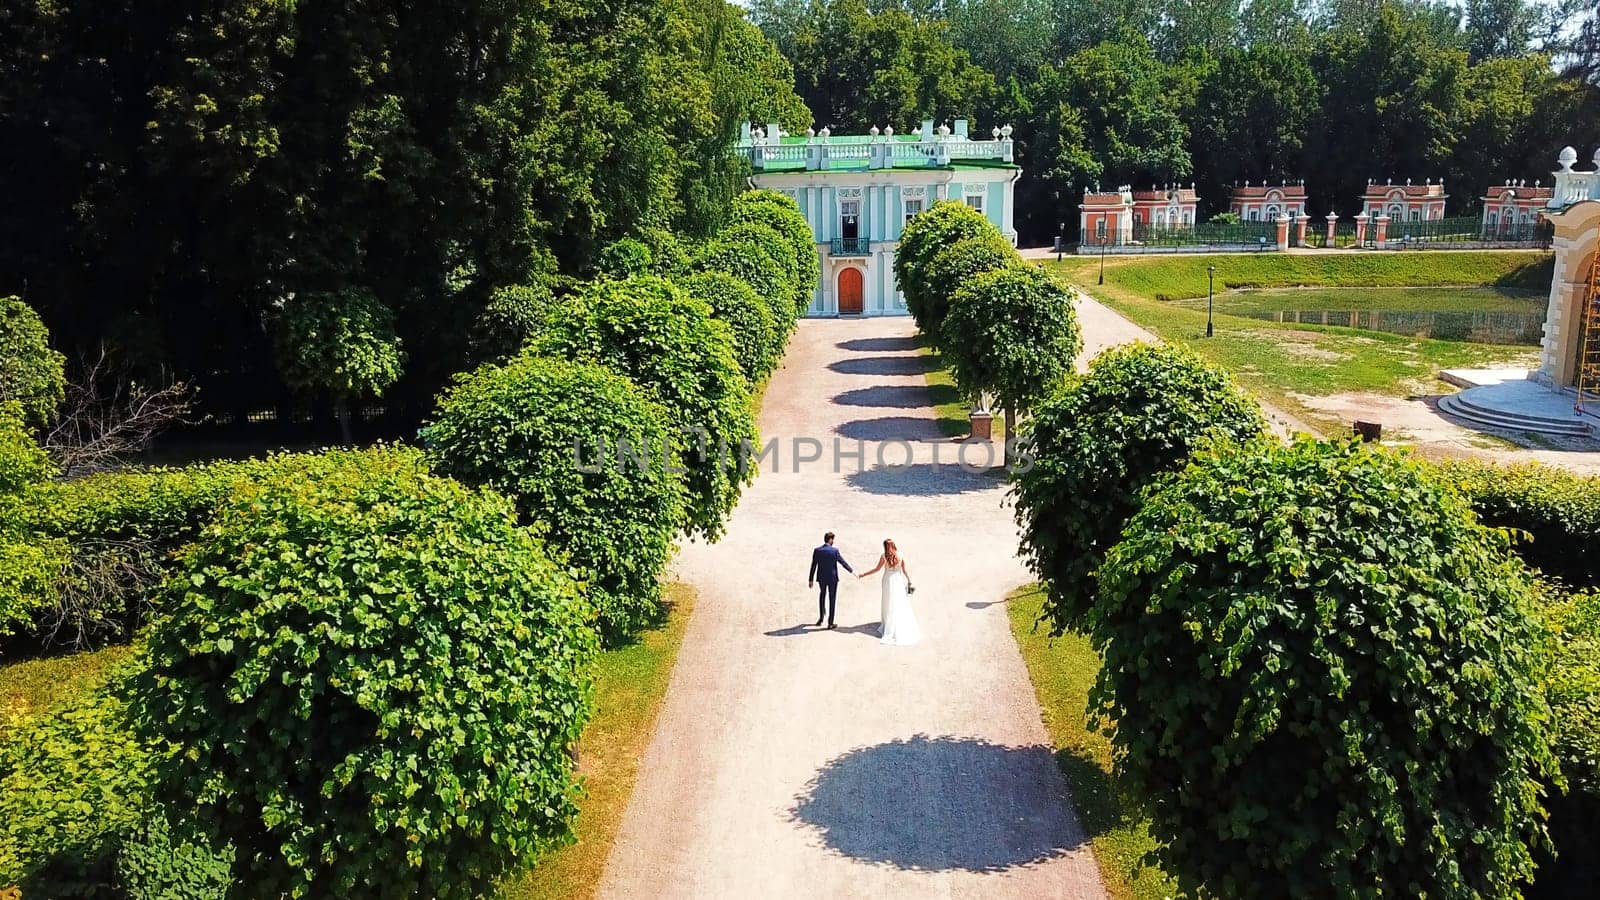 The view from the drone.Creative.A beautiful summer park with small beautifully trimmed trees and a summer road on which beautiful buildings and museums are visible and there is a young married couple with a bride in a beautiful dress and a husband in a suit. High quality 4k footage